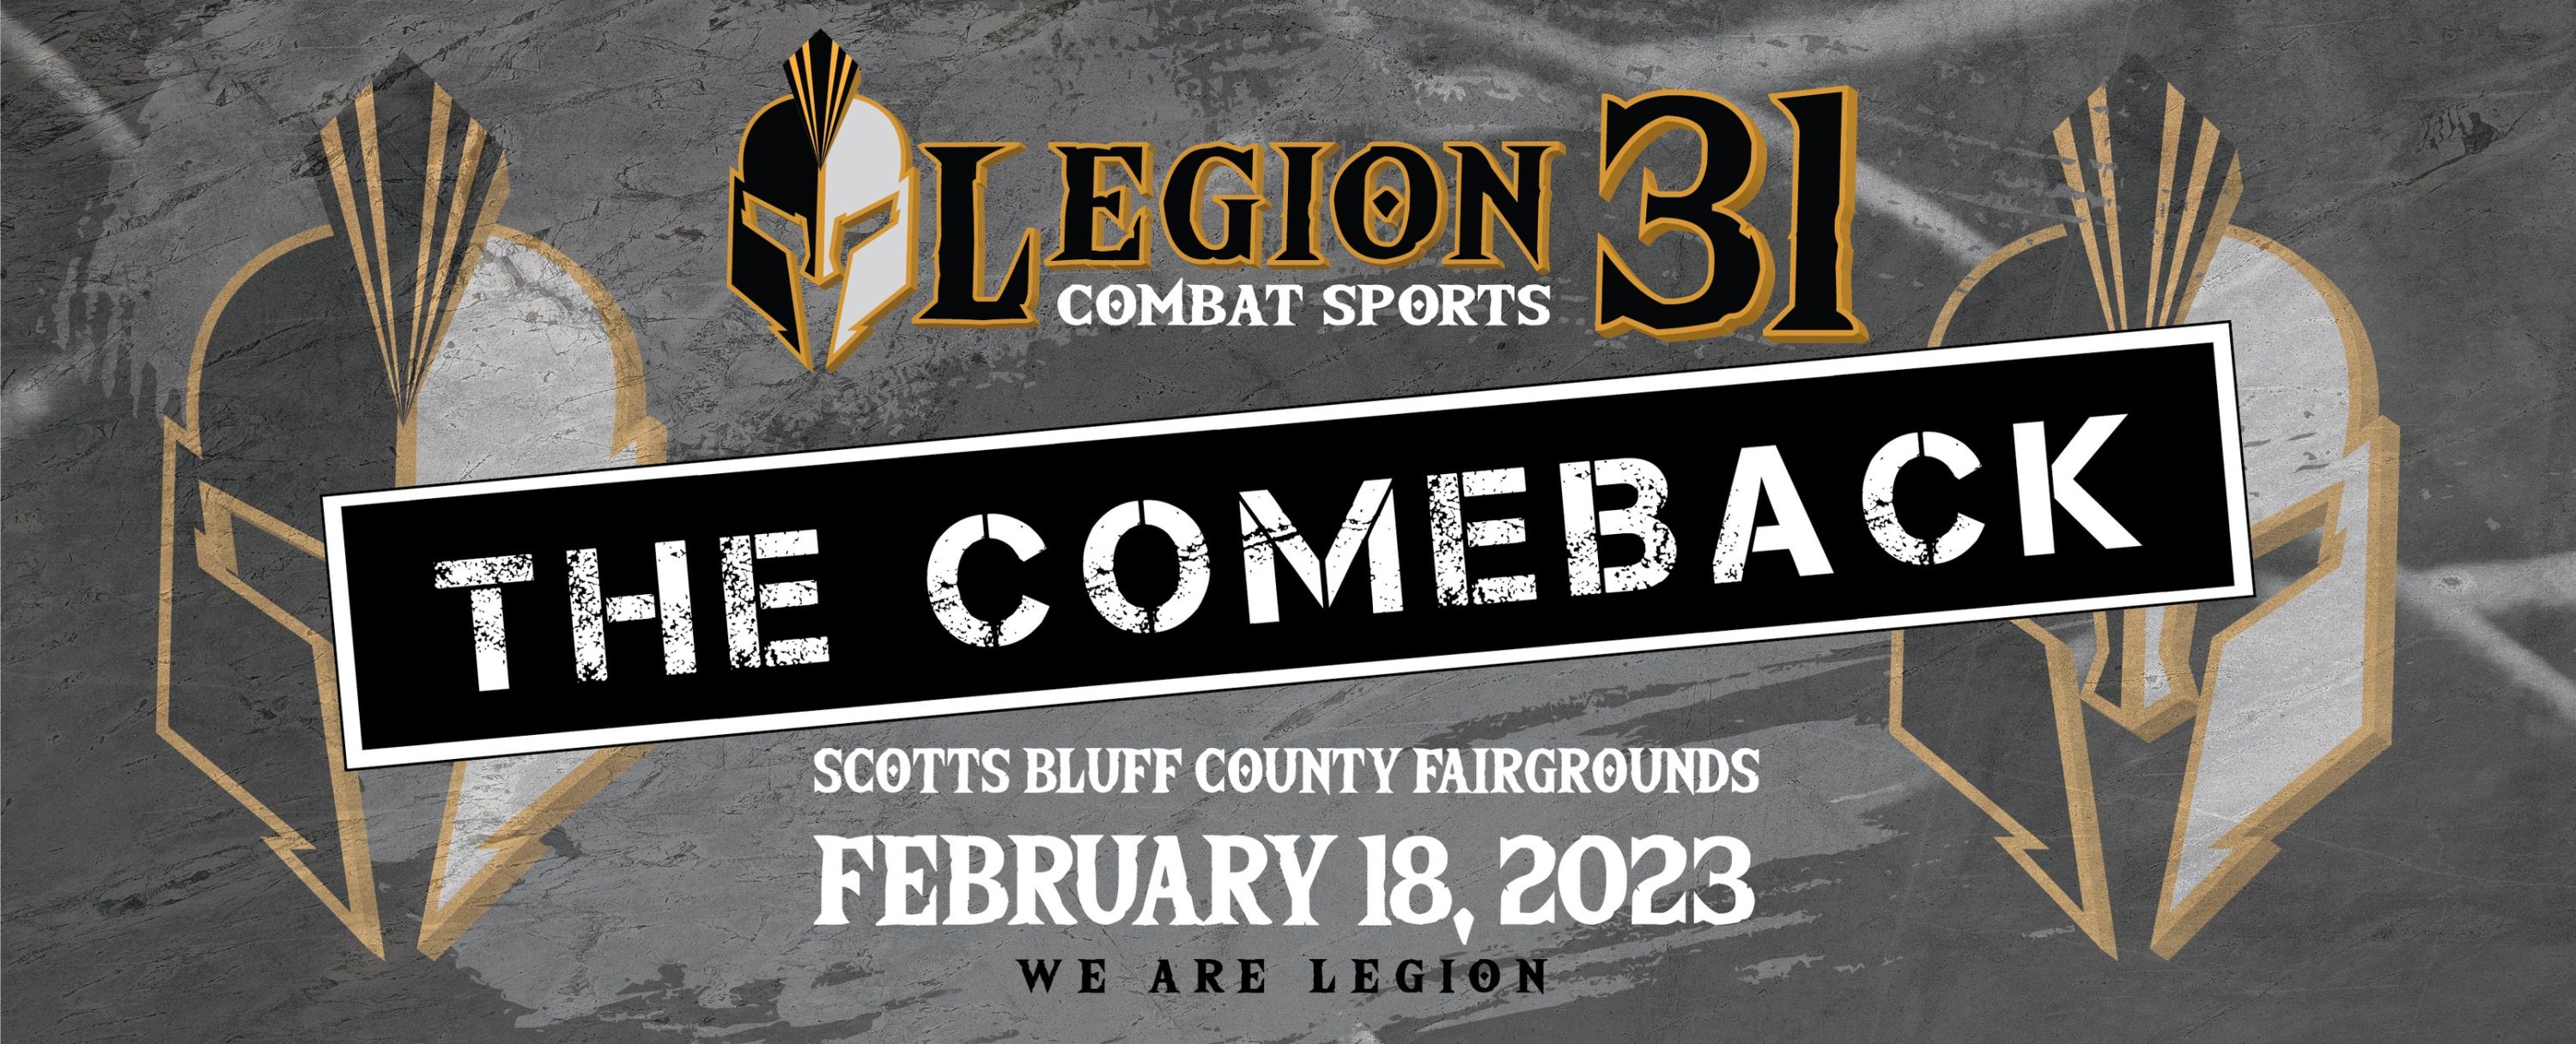 Event Promo Photo For LCS 31: The Comeback